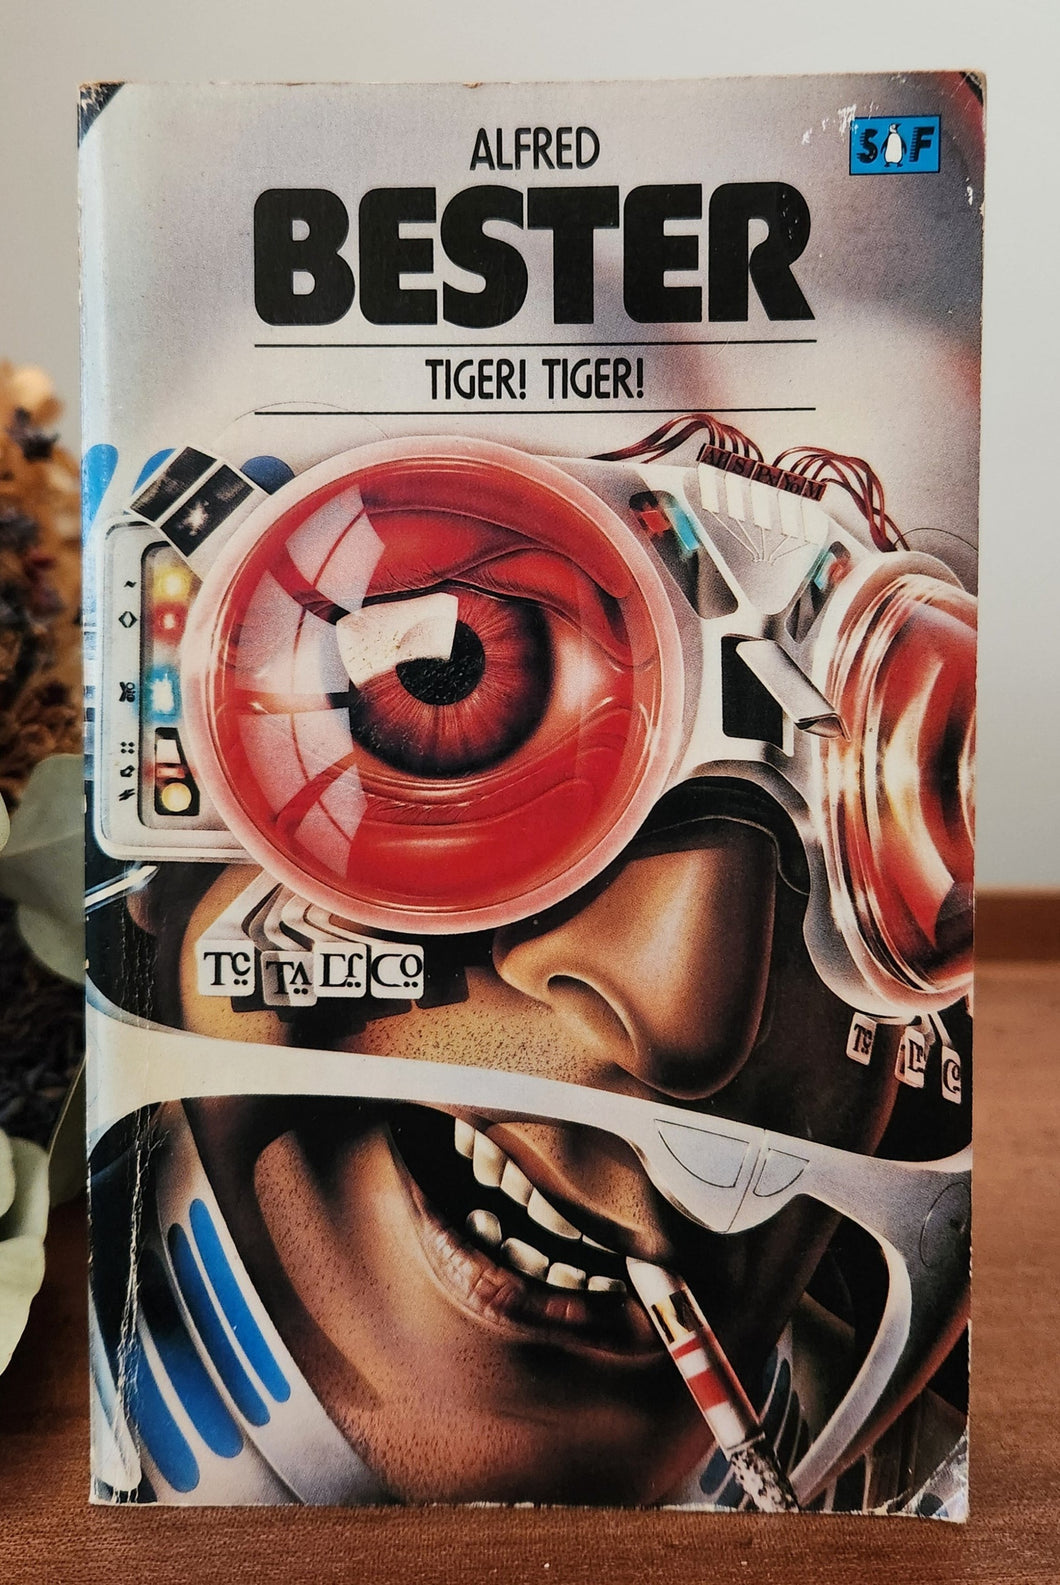 Tiger! Tiger! by Alfred Bester